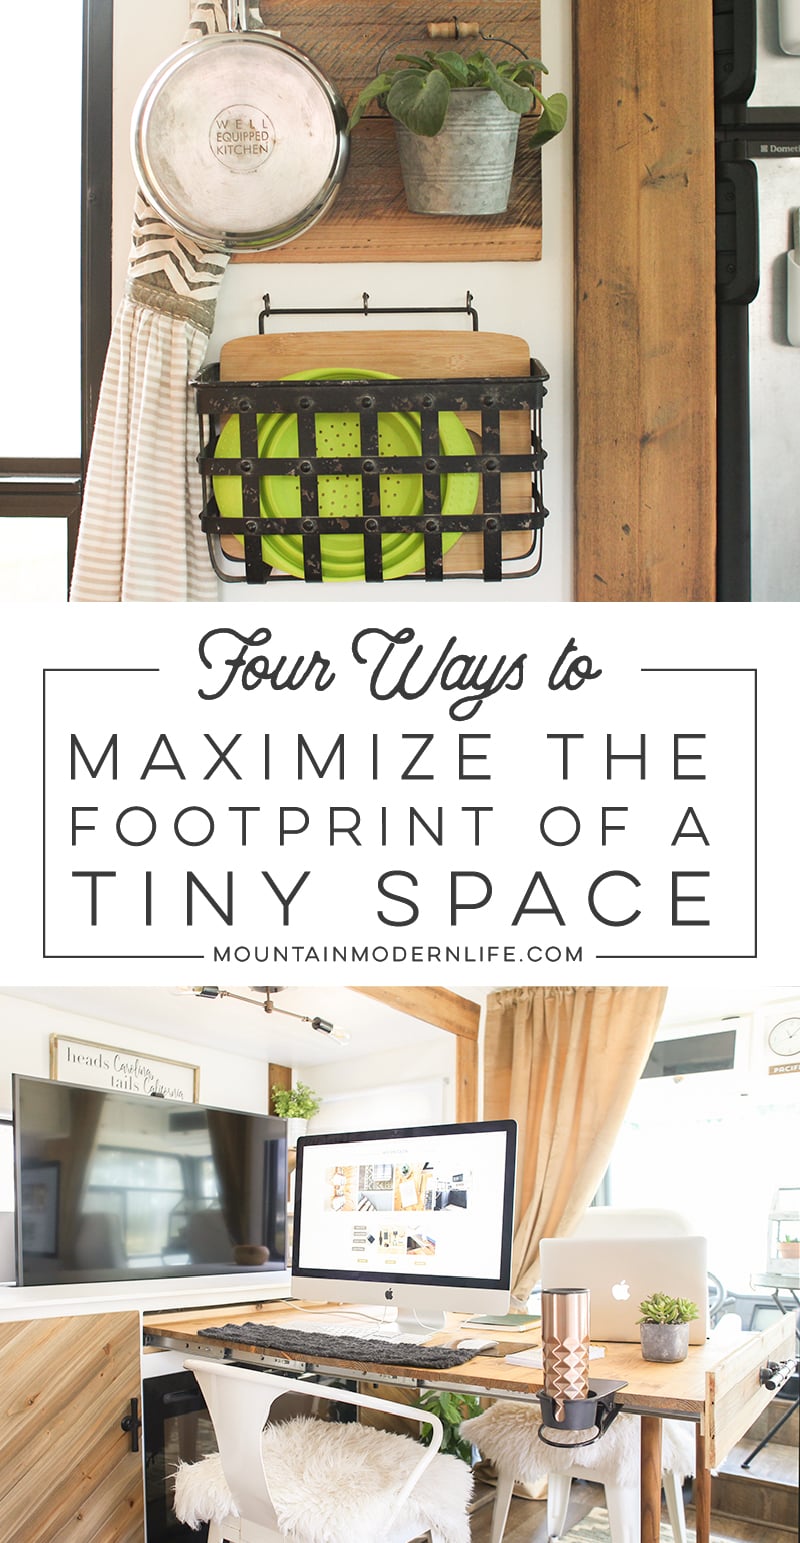 Looking for ways to maximize the space in your tiny house on wheels? Check out these four tips! MountainModernLife.com